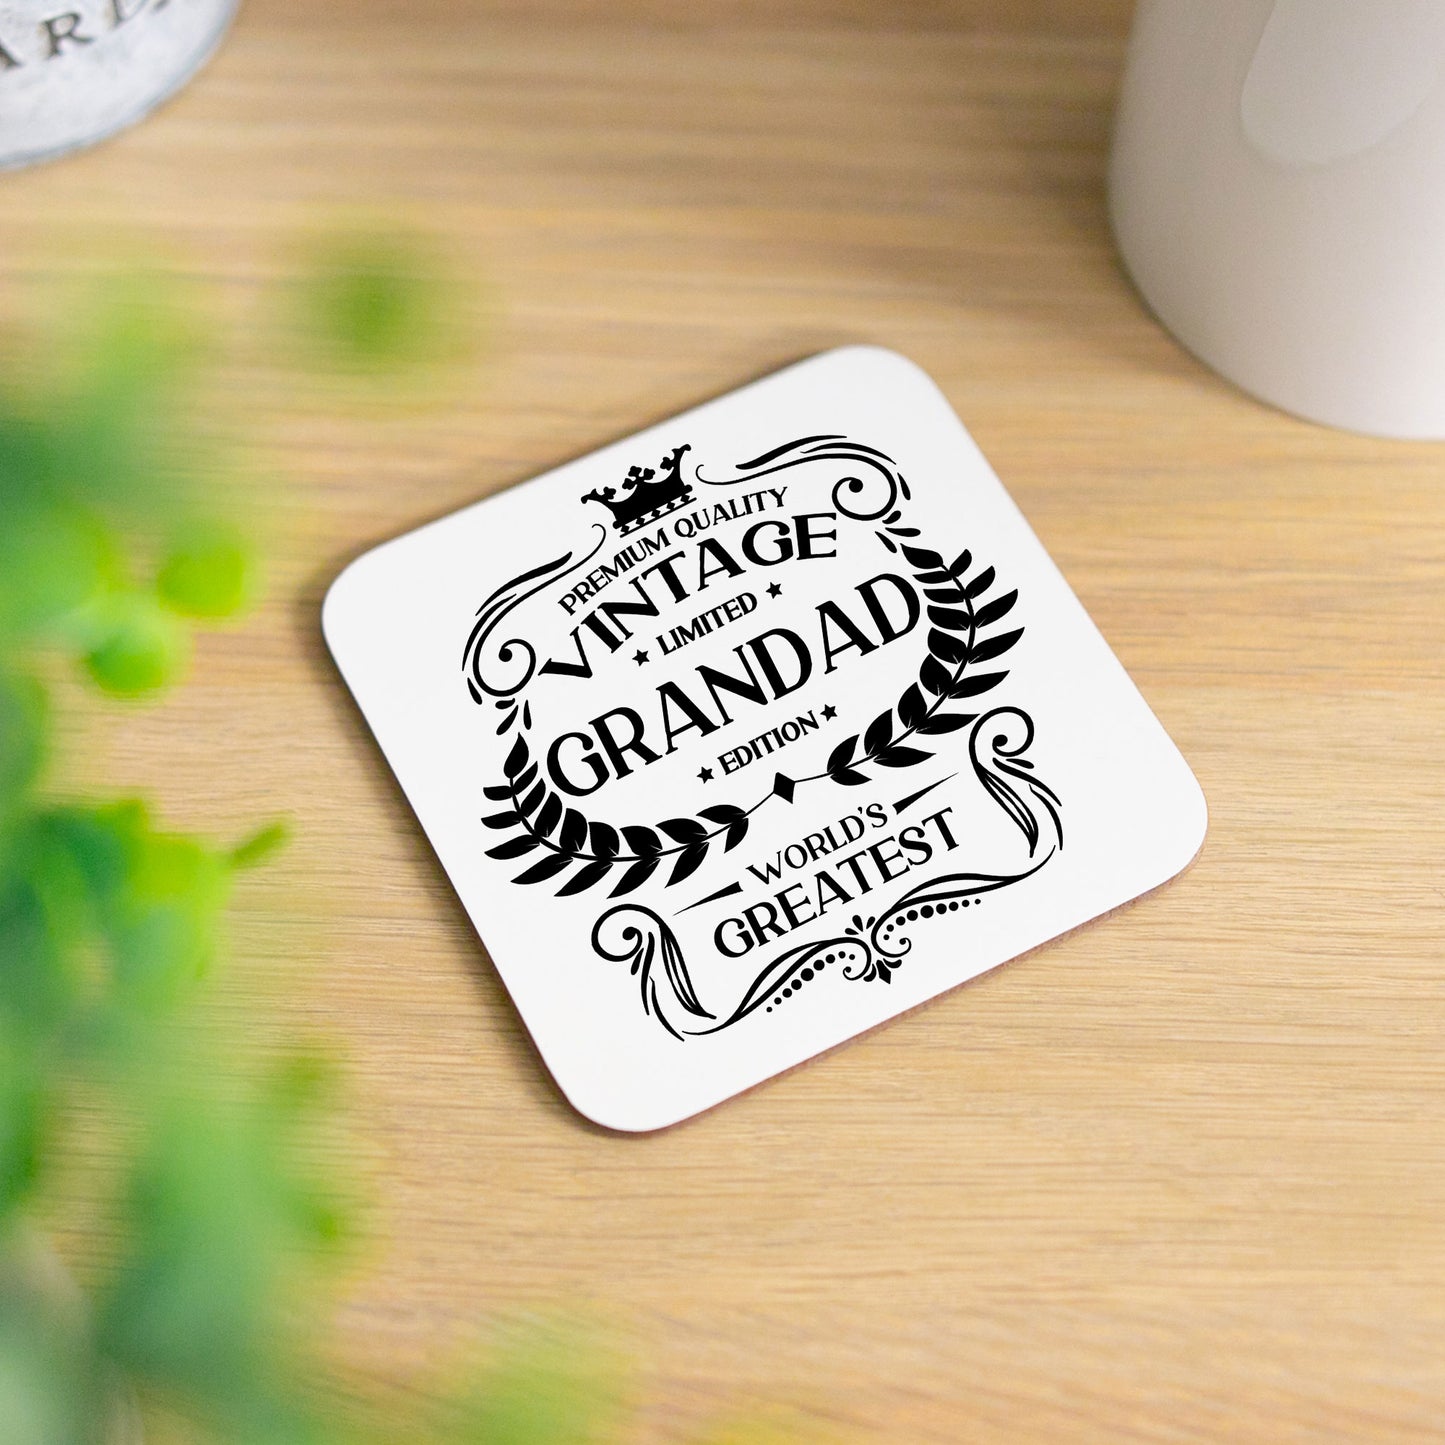 Vintage World's Greatest Grandad Engraved Whisky Glass  - Always Looking Good - Glass & Printed Coaster  